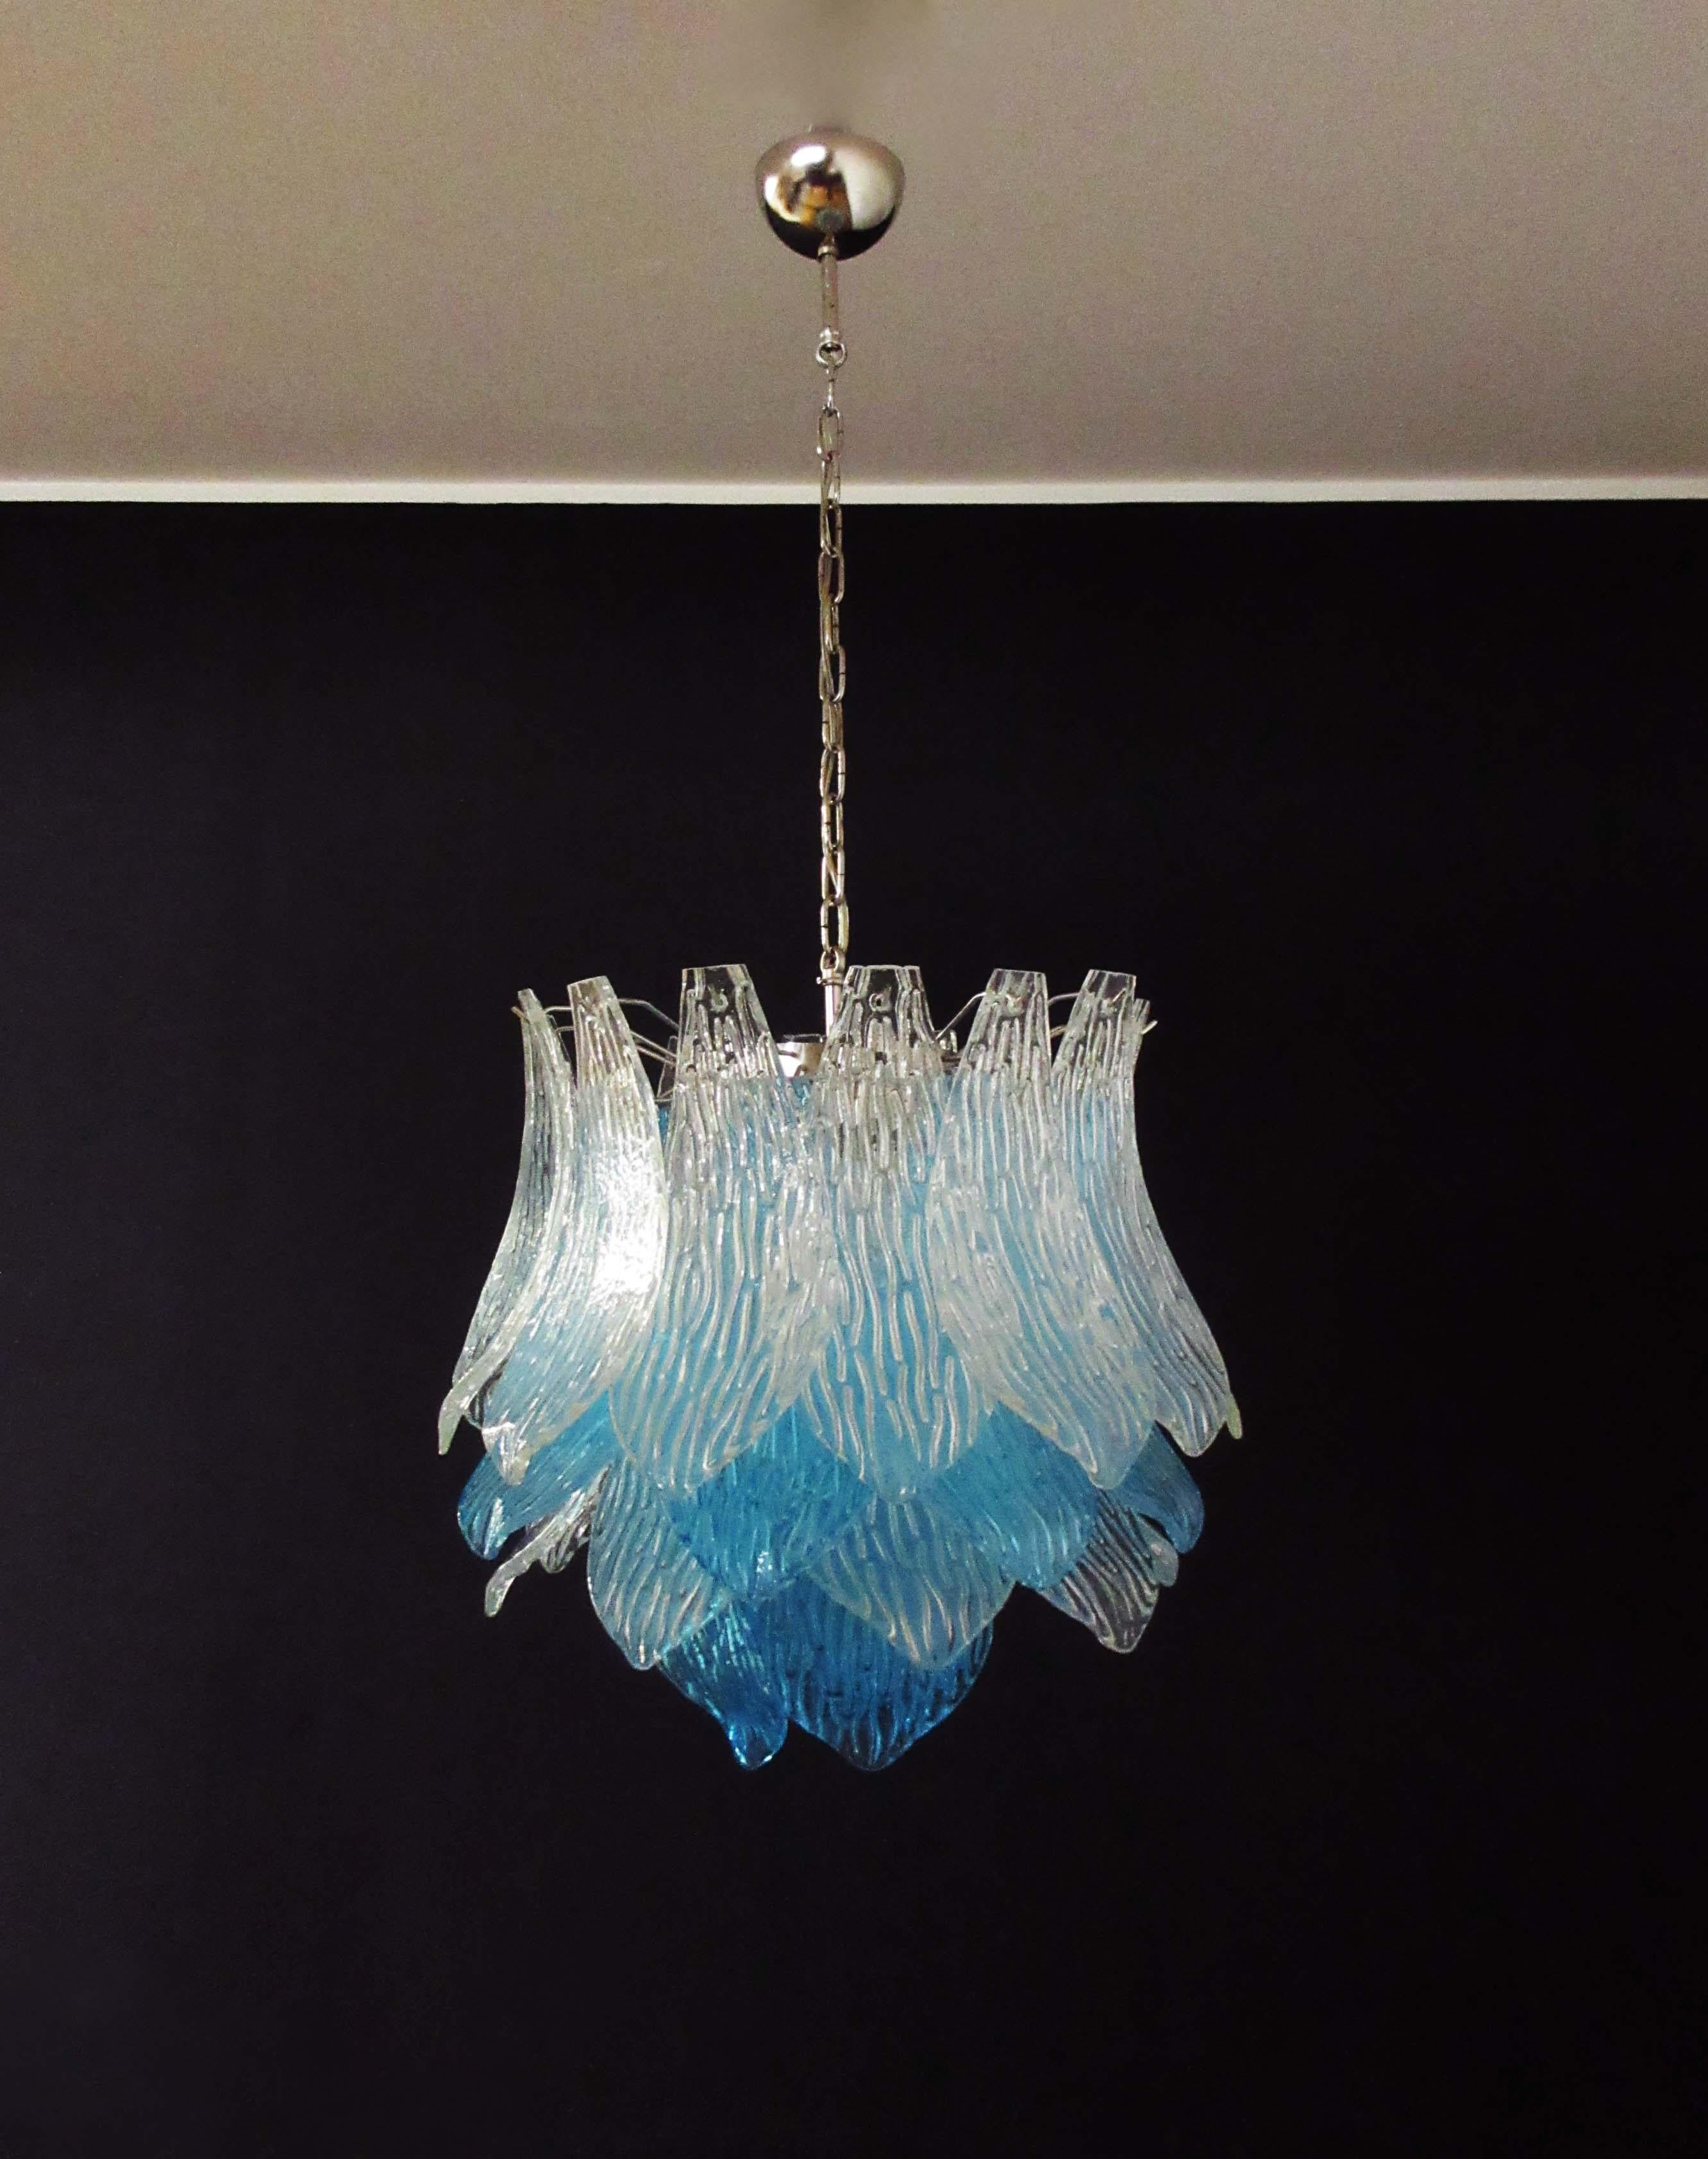 Beautiful and huge Italian Murano Chandelier composed of 38 splendid trasparent and blue glasses that give a very elegant look. The glasses of this chandelier are real works of art. This chandelier is shaped like a blossoming flower.
Period: